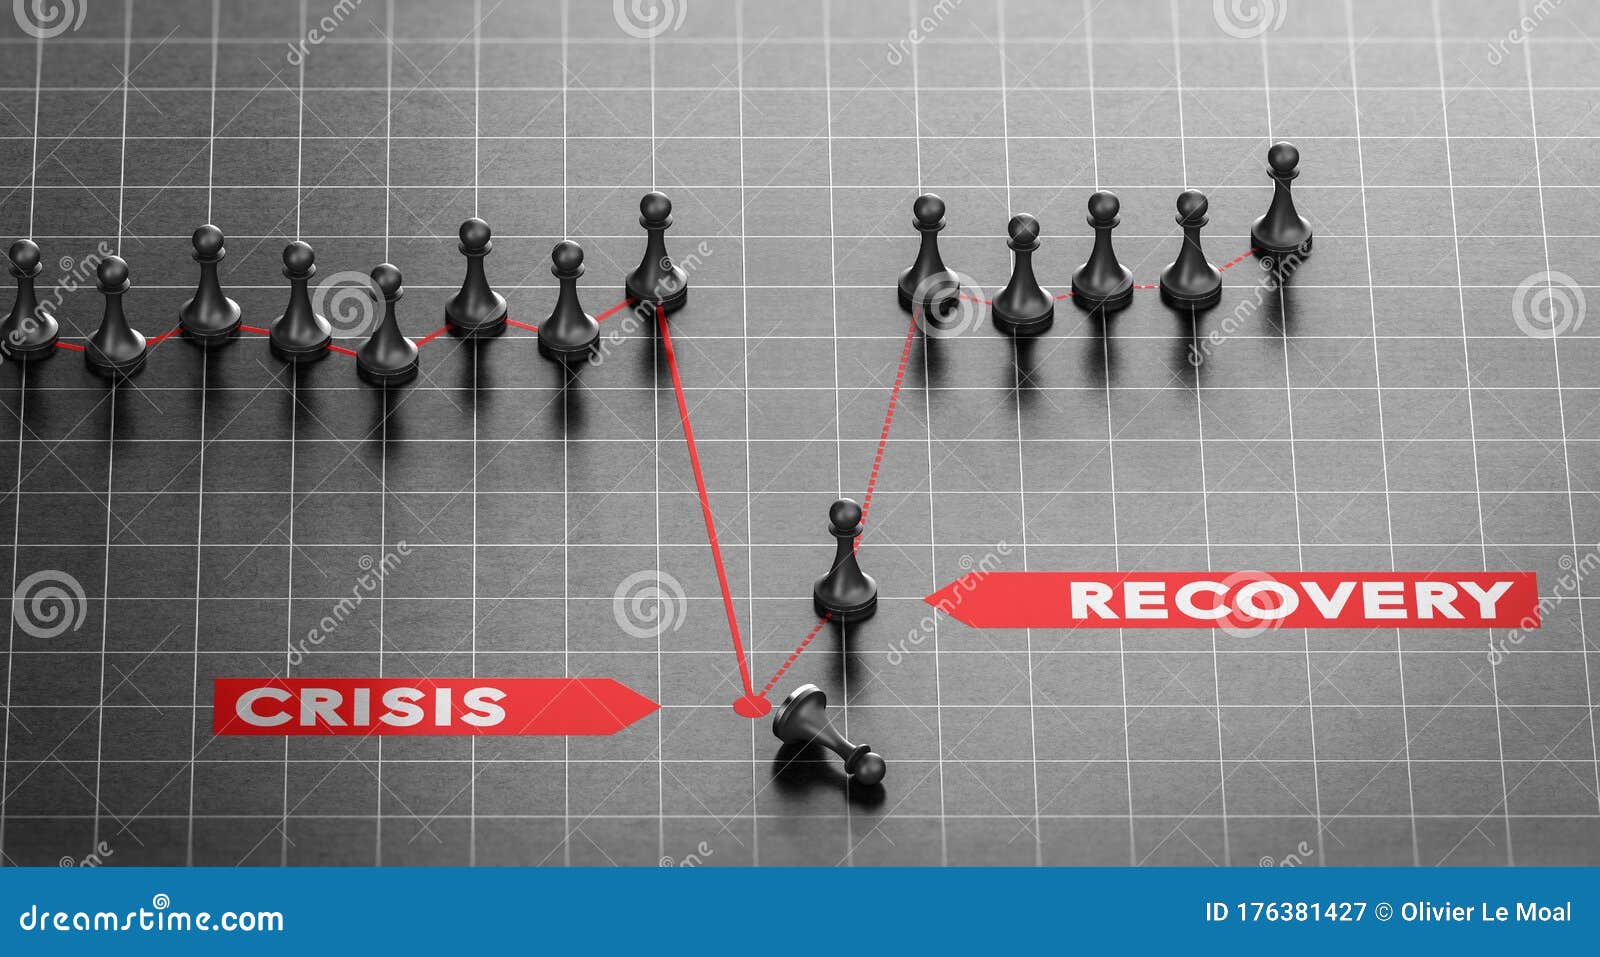 disaster recovery. business continuity plan after crisis